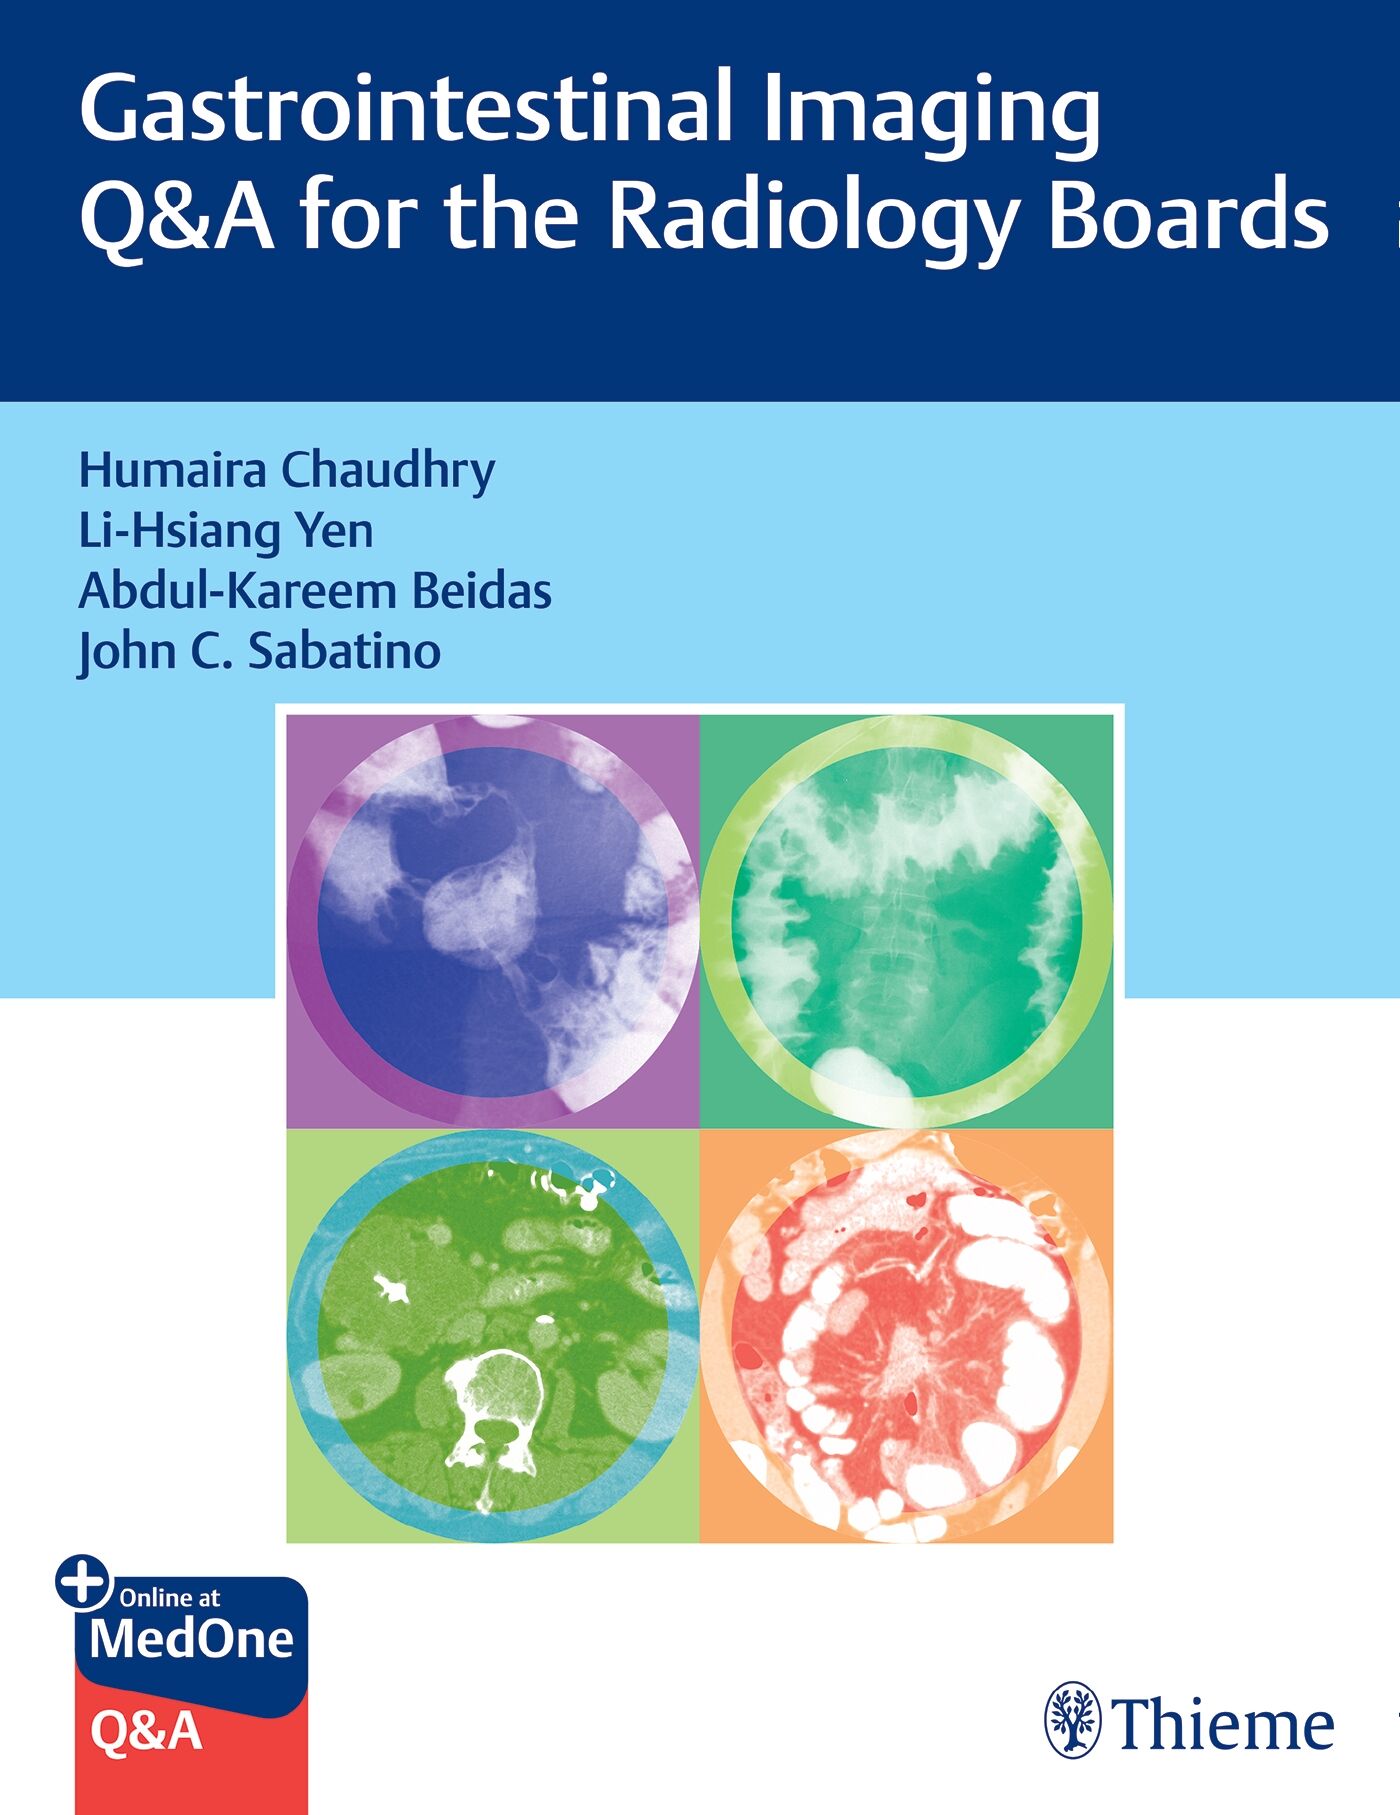 Gastrointestinal Imaging Q&A for the Radiology Boards, 9781684205578